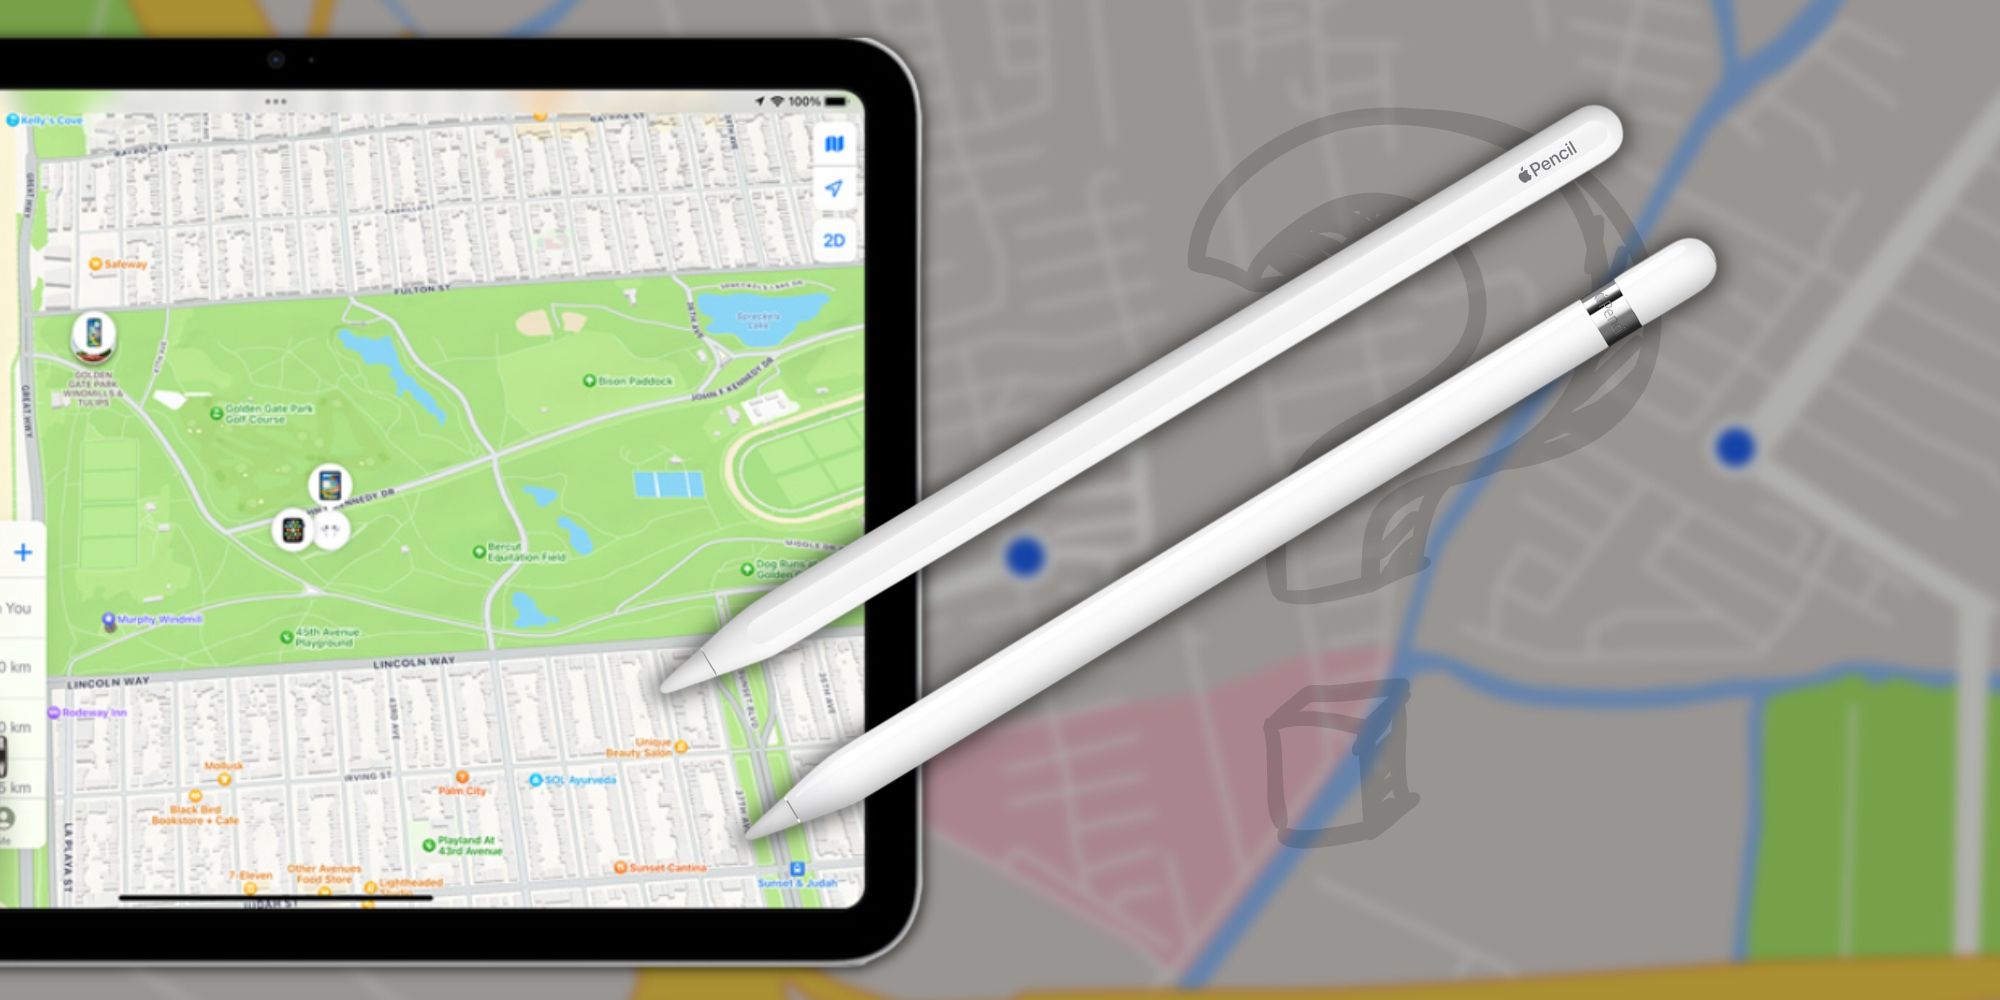 iPad and Apple Pencil with Find My network in the background